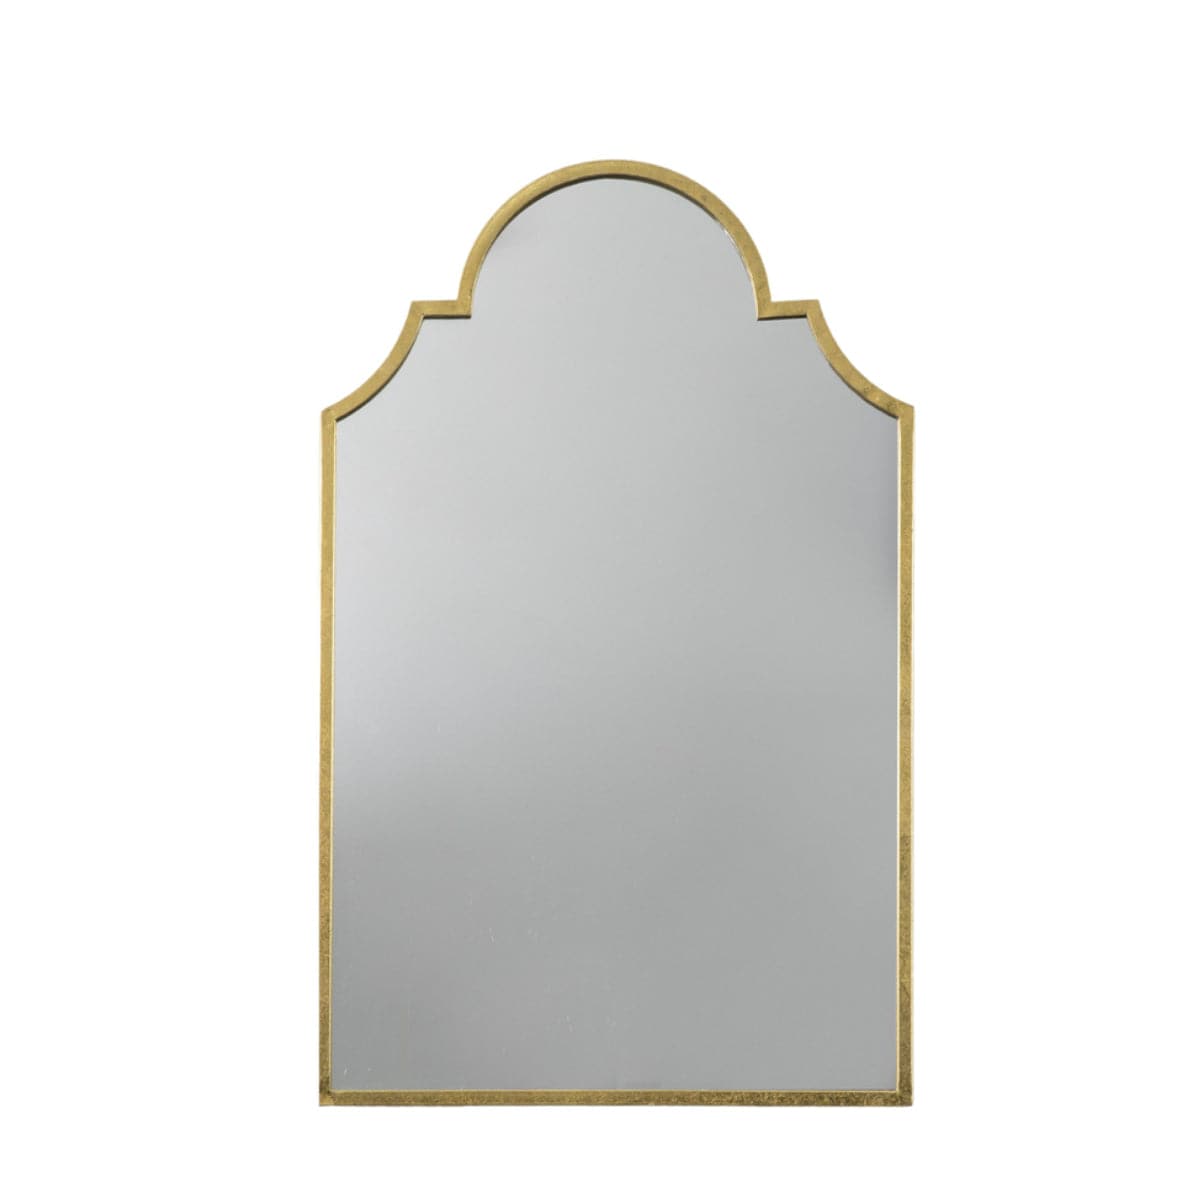 Decorative Distressed Gold Arched Top Portrait Mirror - The Farthing